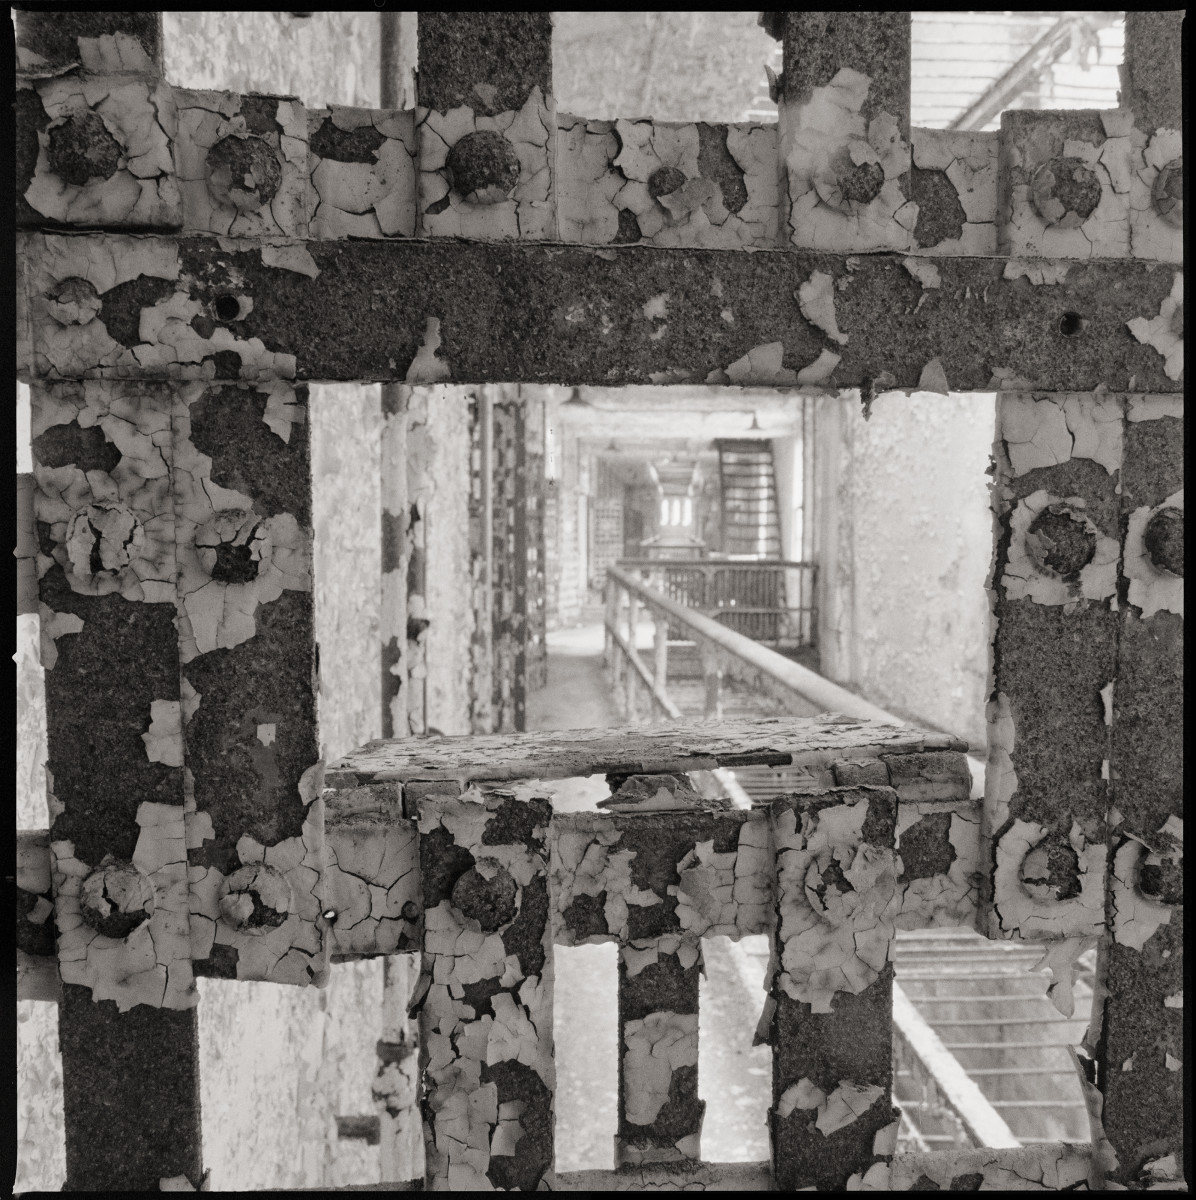 Cellblock #14 by Eric T. Kunsman  Image: ID: A black and white image shows a view of the cellblock from inside a cell, through the metal door.  There is a railing to the right and more cells to the left.